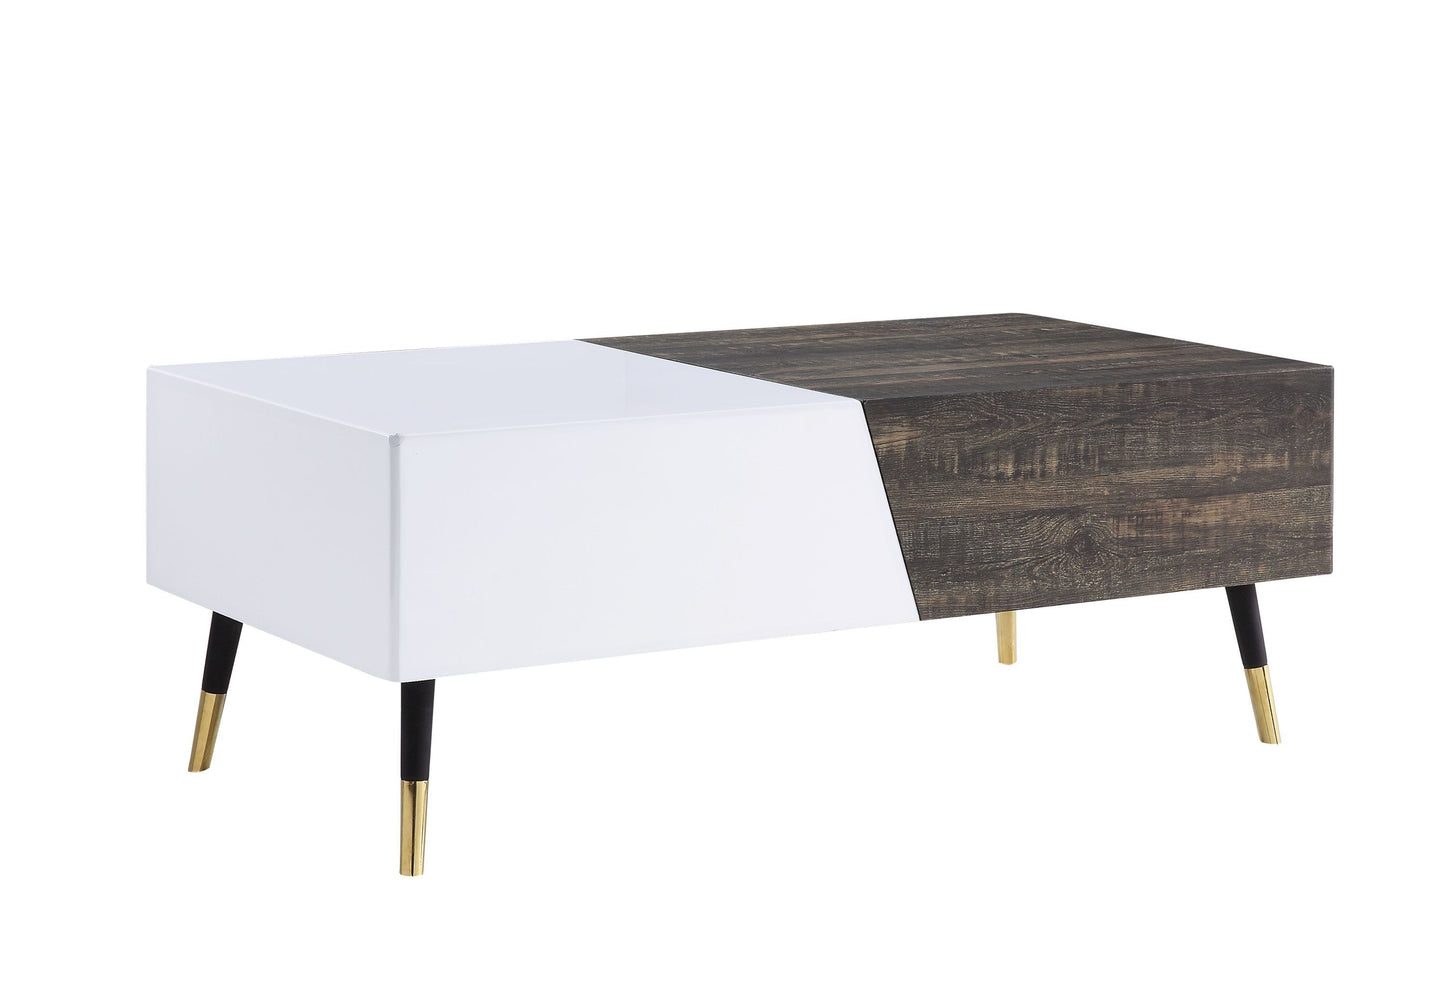 Orion Coffee Table in White High Gloss & Rustic Oak